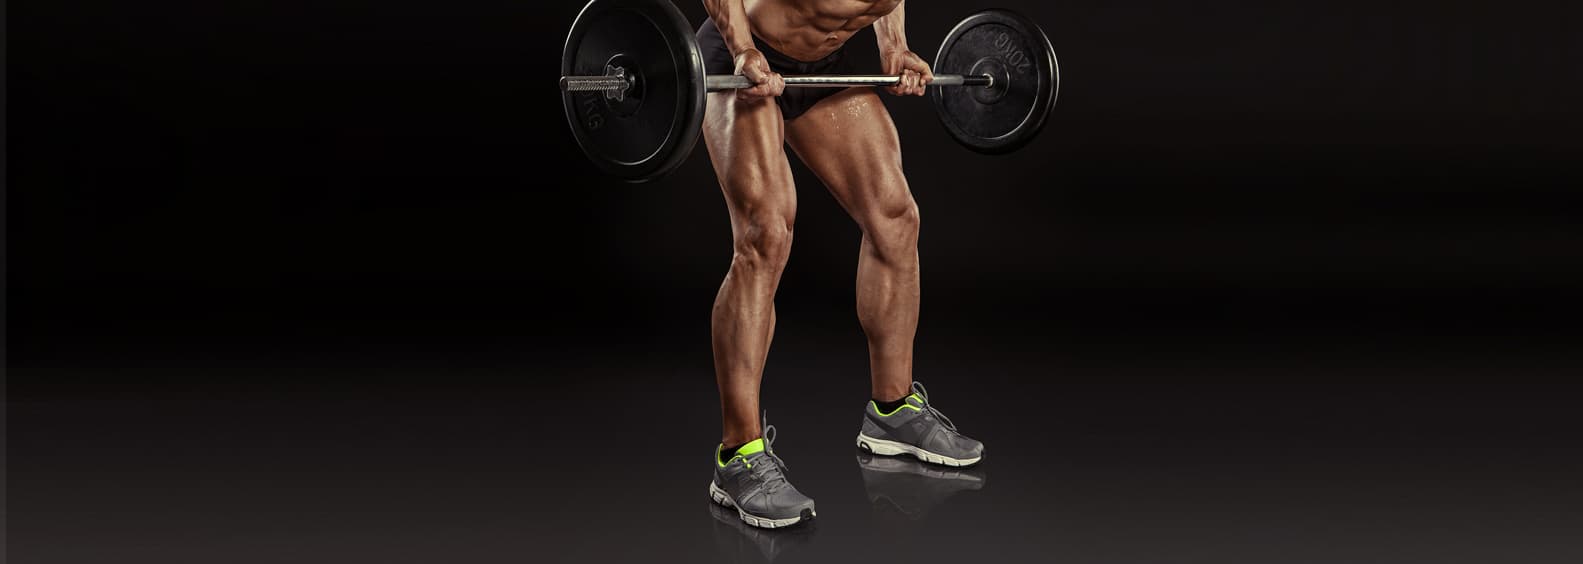 Leg Workouts to Pump Up Legs Day